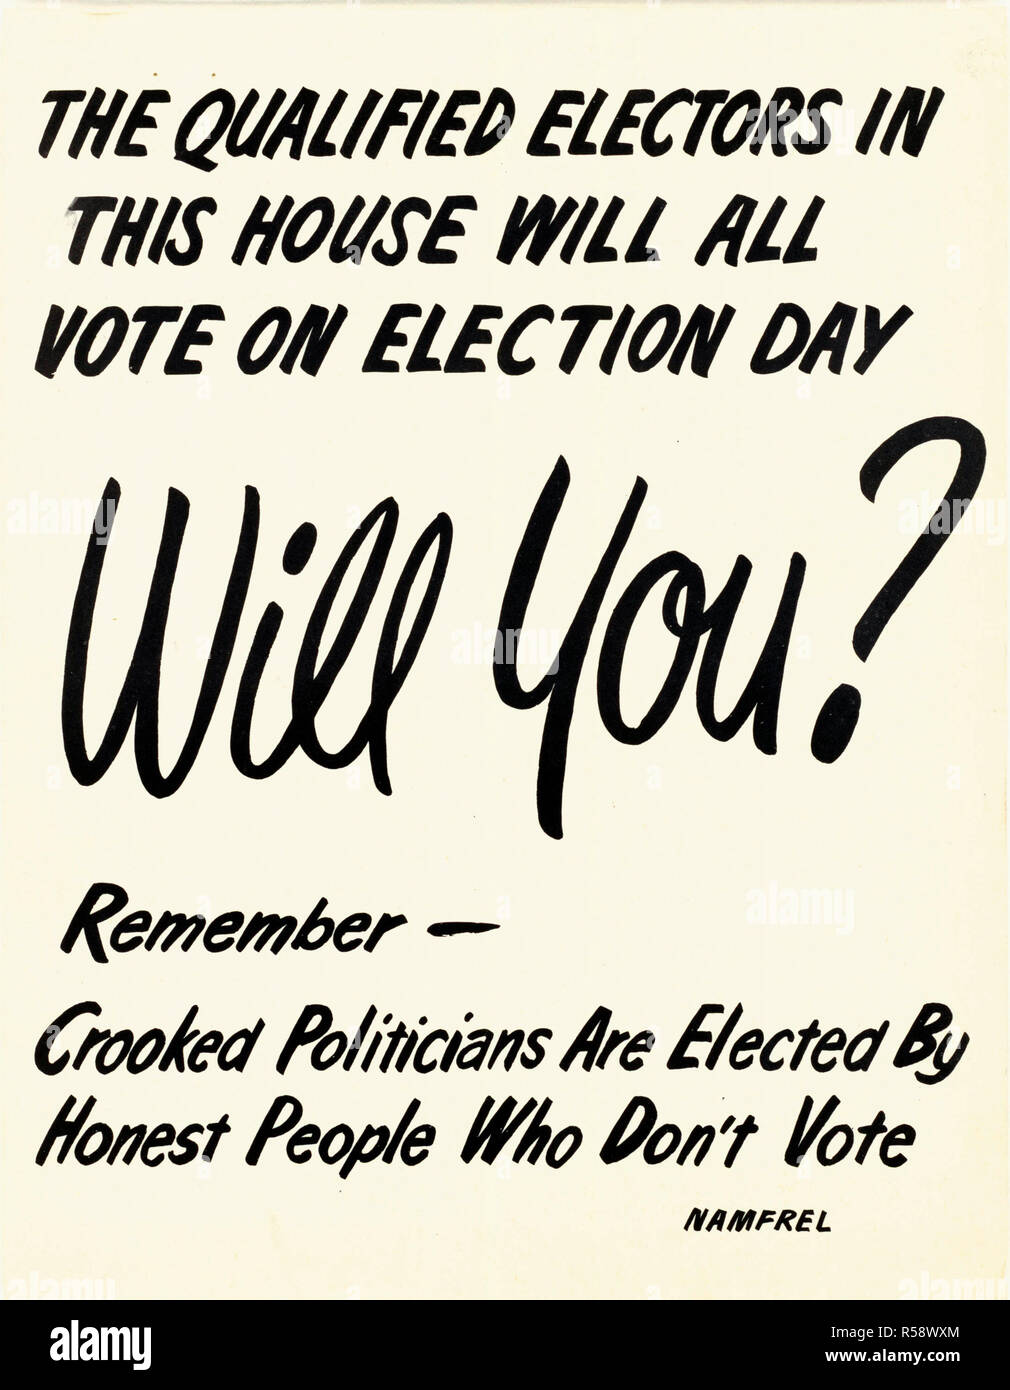 NOBODY can stop us from exercising our God given right to VOTE  - 1950s Get Out the Vote Poster Stock Photo